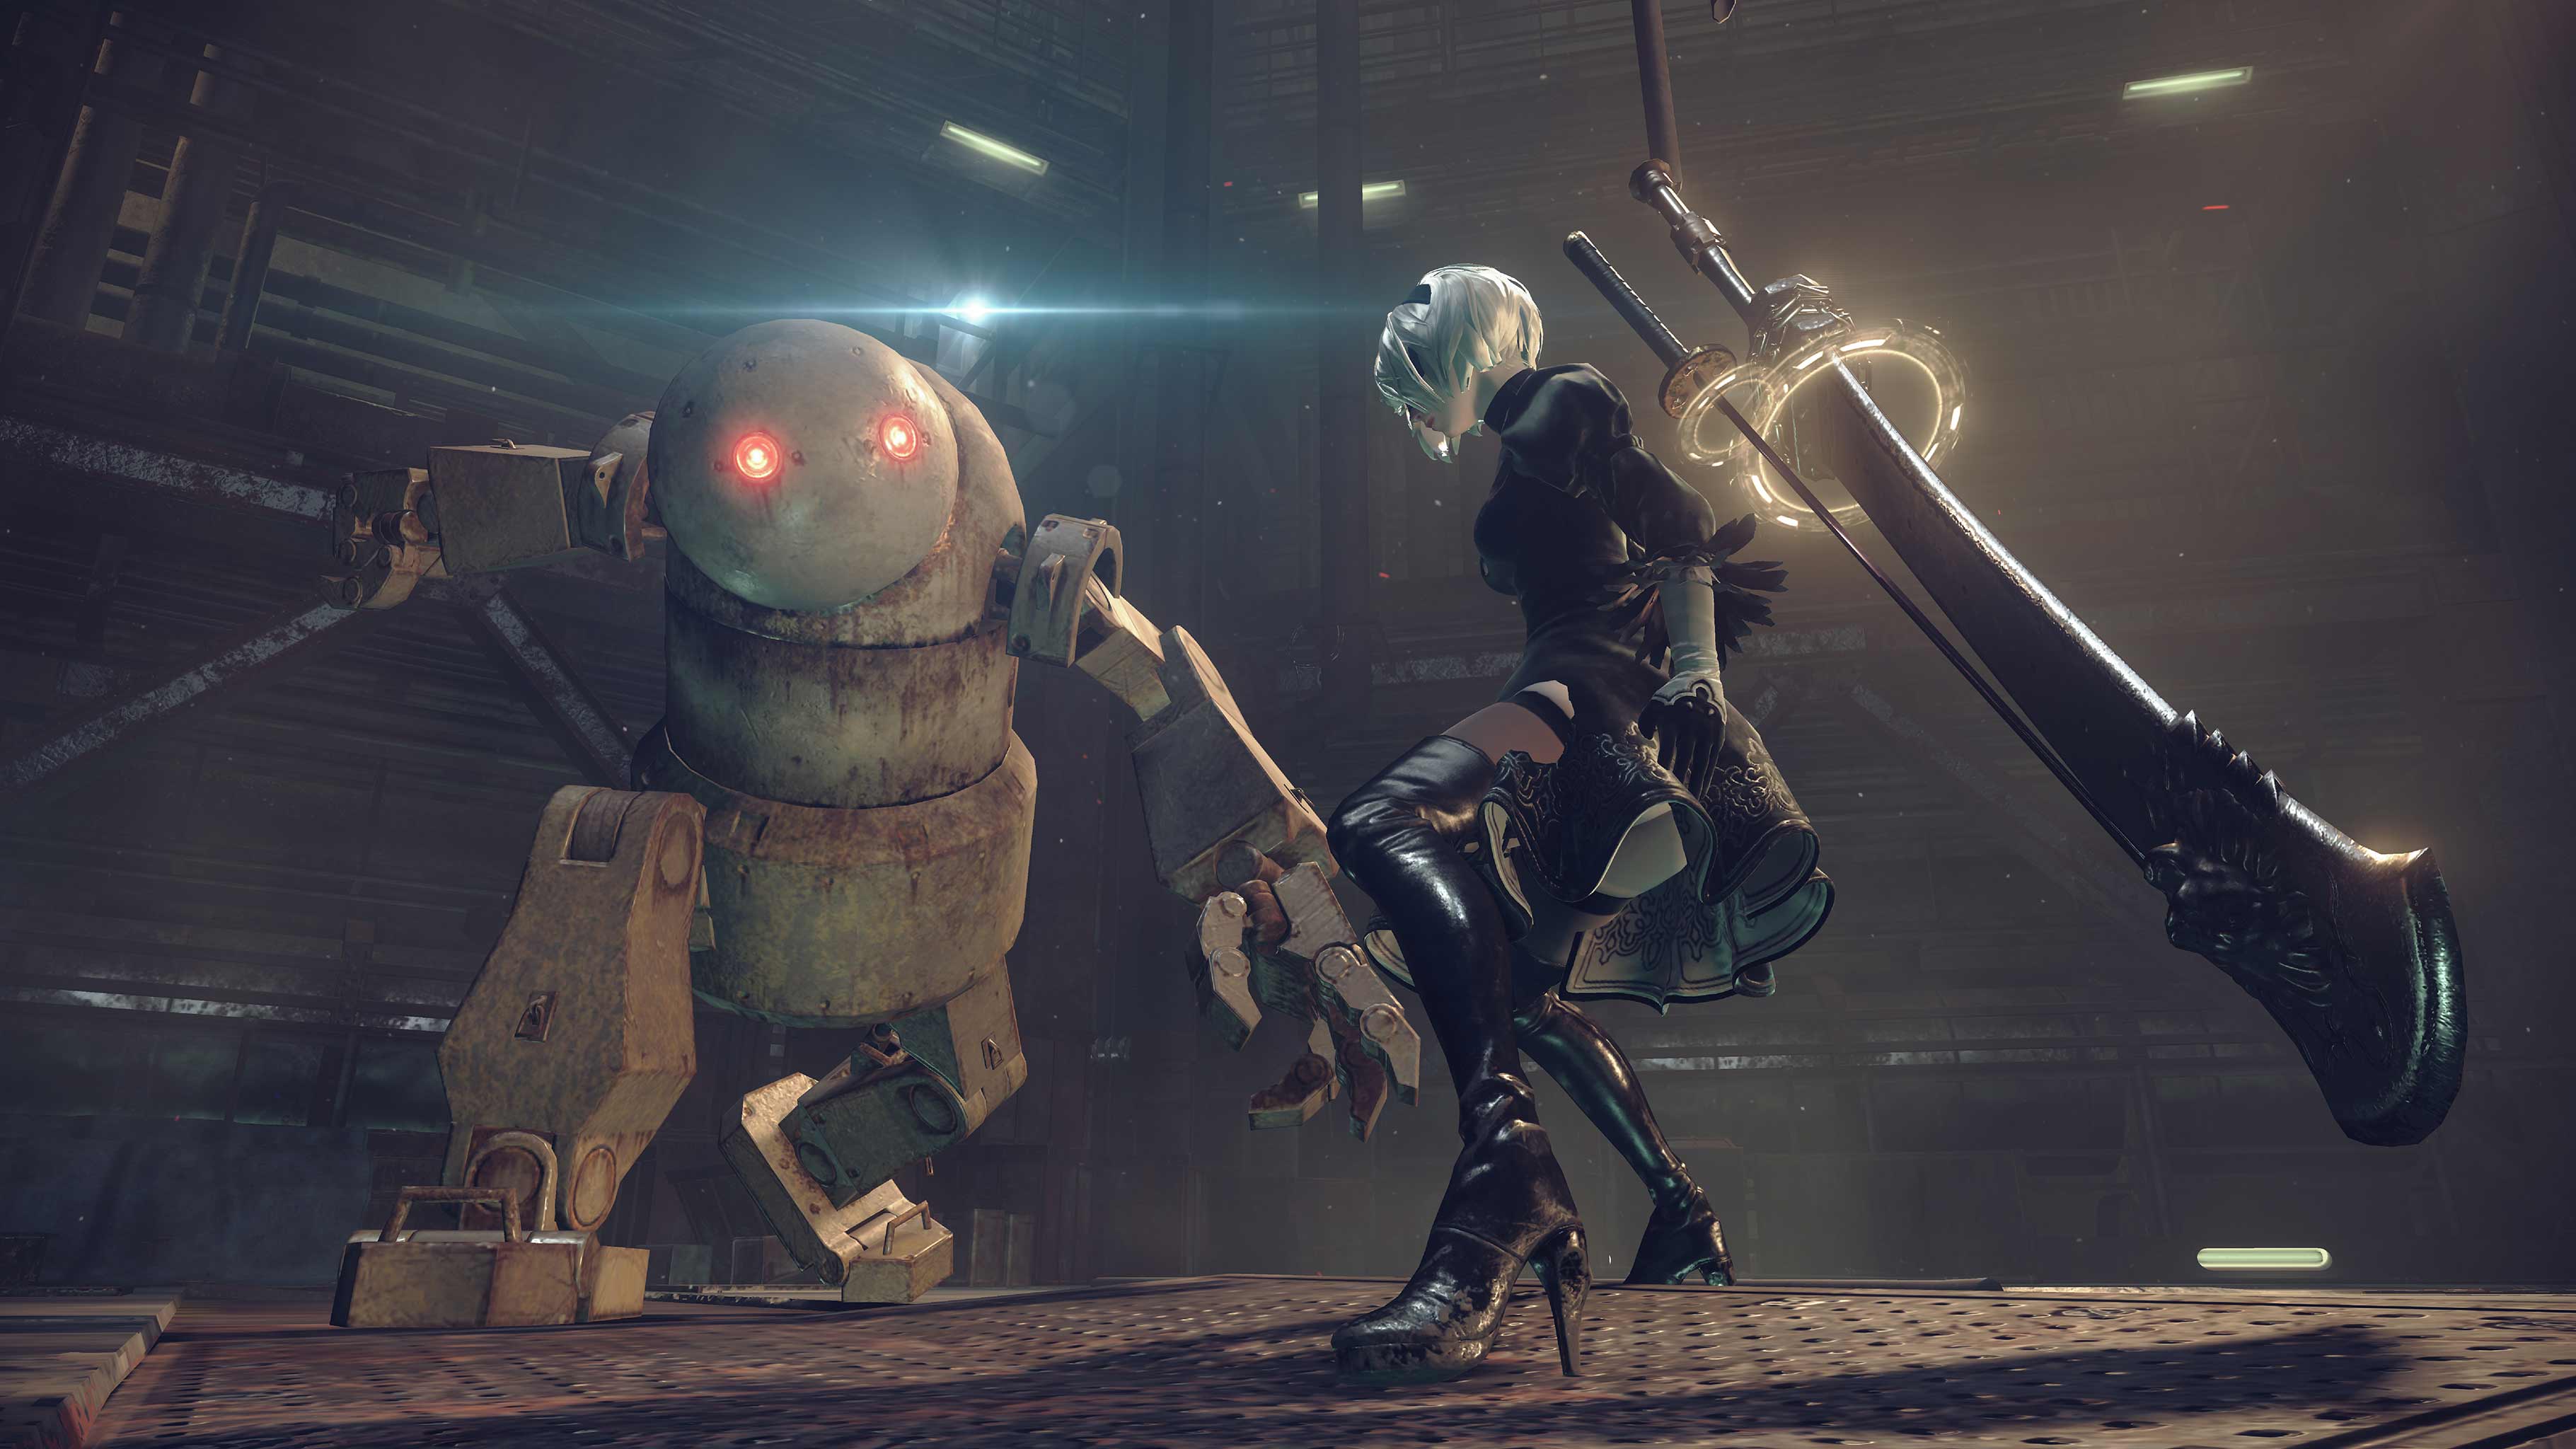 Image for 4 months later, Nier Automata's rough PC port still doesn't have a patch nor even a promise of one